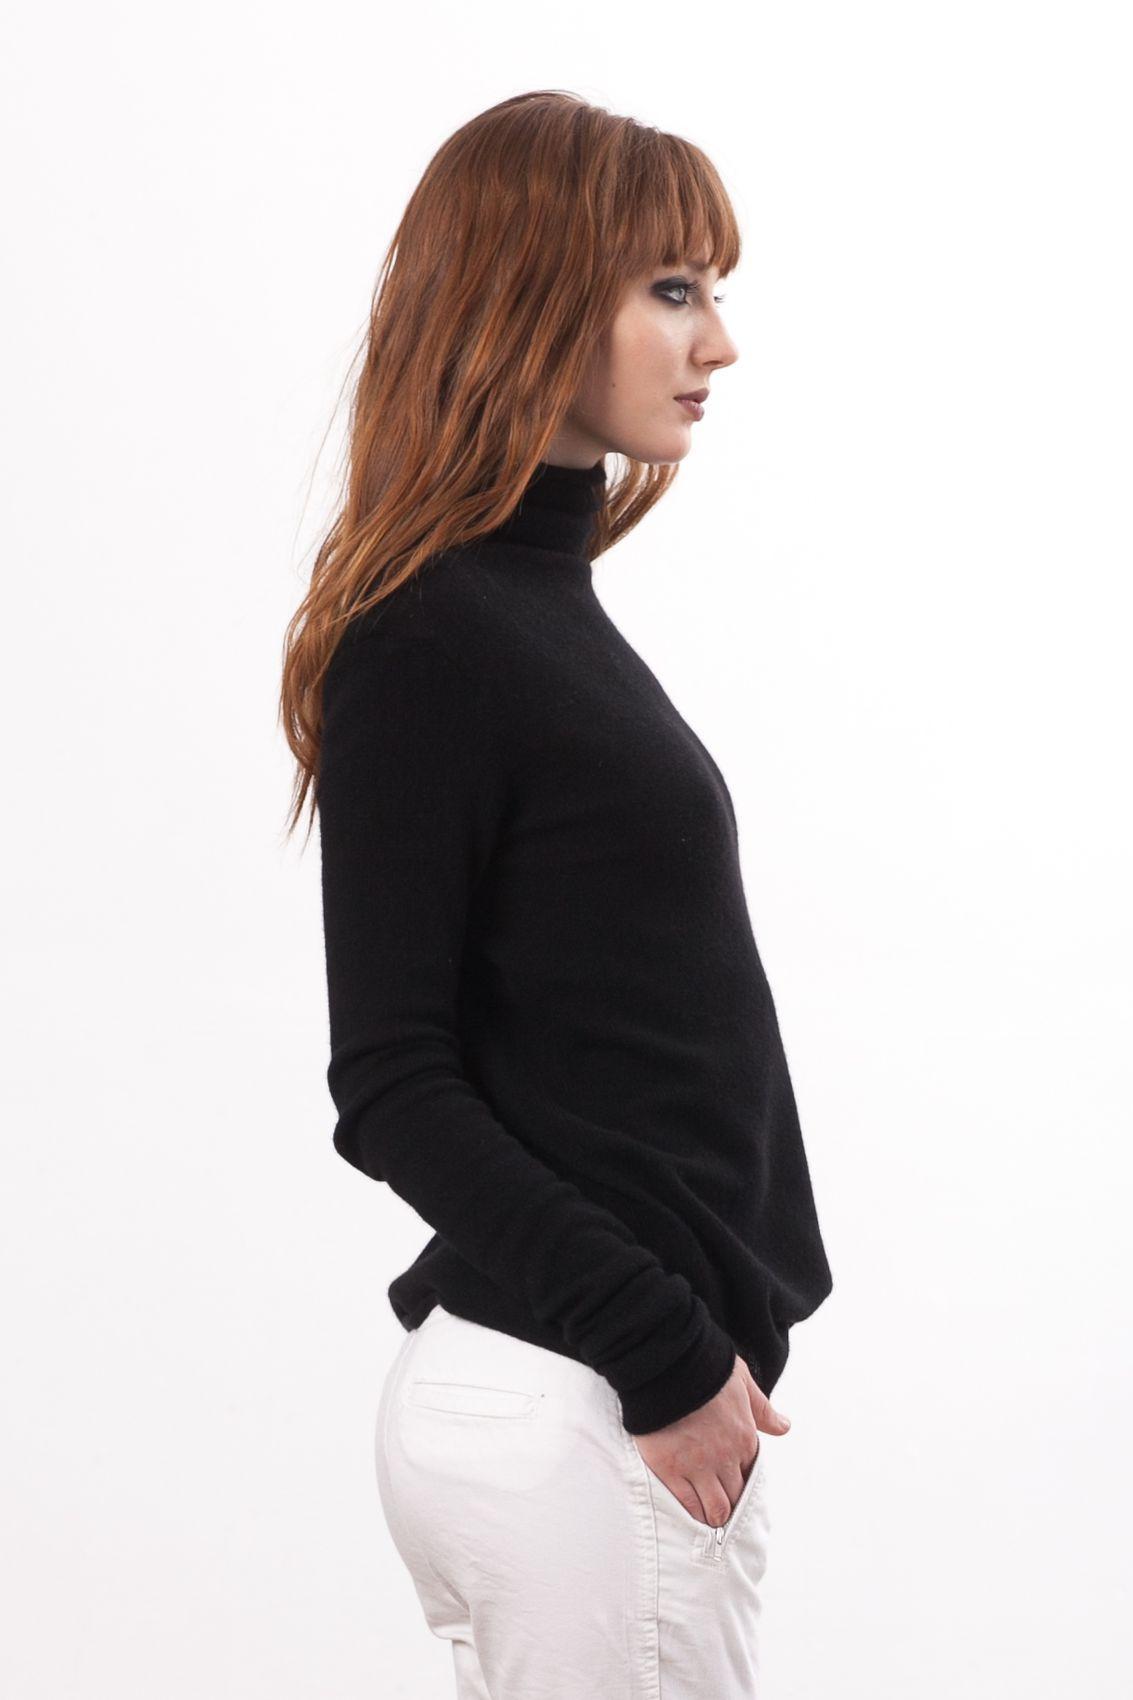 Radiating understated glamour, the KATE by Krista Elsta black cashmere turtleneck steals the spotlight in this image. The exquisite cashmere fabric drapes gracefully, providing a soft and indulgent touch to the skin. The turtleneck's sleek design is elevated by its deep black hue, creating a versatile garment that effortlessly transitions from day to night. Embrace the timeless appeal of this wardrobe staple, where comfort meets refined style in perfect harmony.